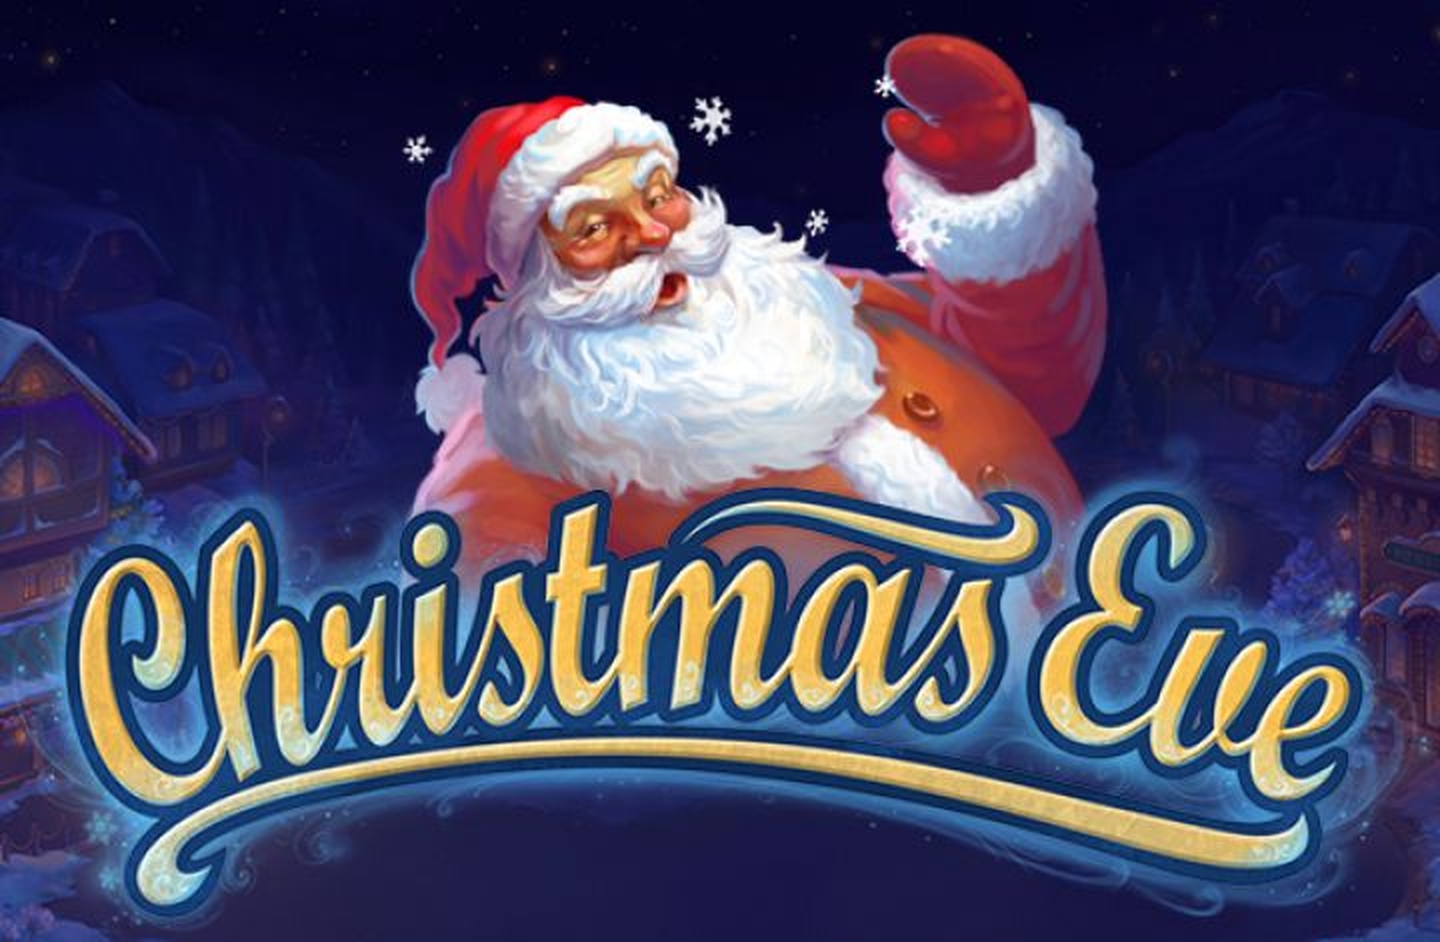 The Christmas Eve Online Slot Demo Game by Playson